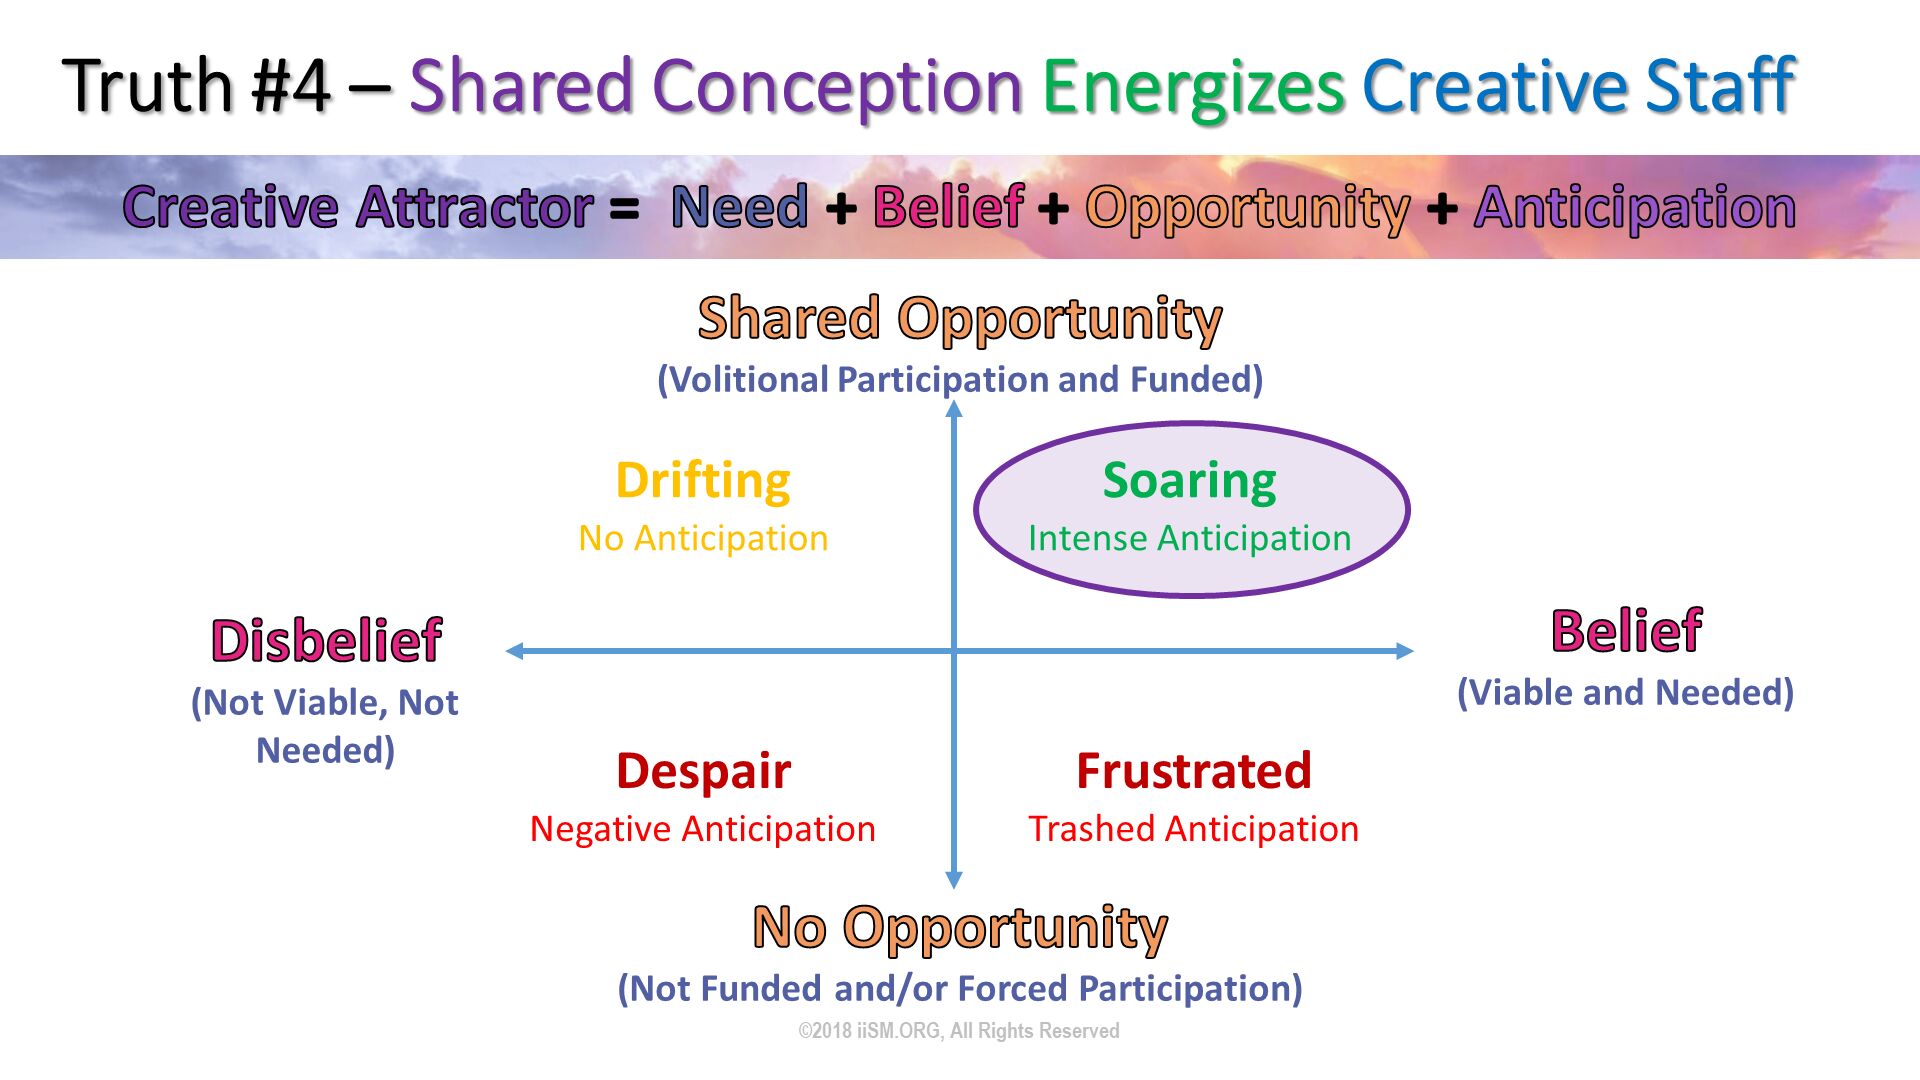 Truth #4 – Shared Conception Energizes Creative Staff. ©2018 iiSM.ORG, All Rights Reserved. No Opportunity(Not Funded and/or Forced Participation). Disbelief(Not Viable, Not Needed). Belief(Viable and Needed). Shared Opportunity(Volitional Participation and Funded). 